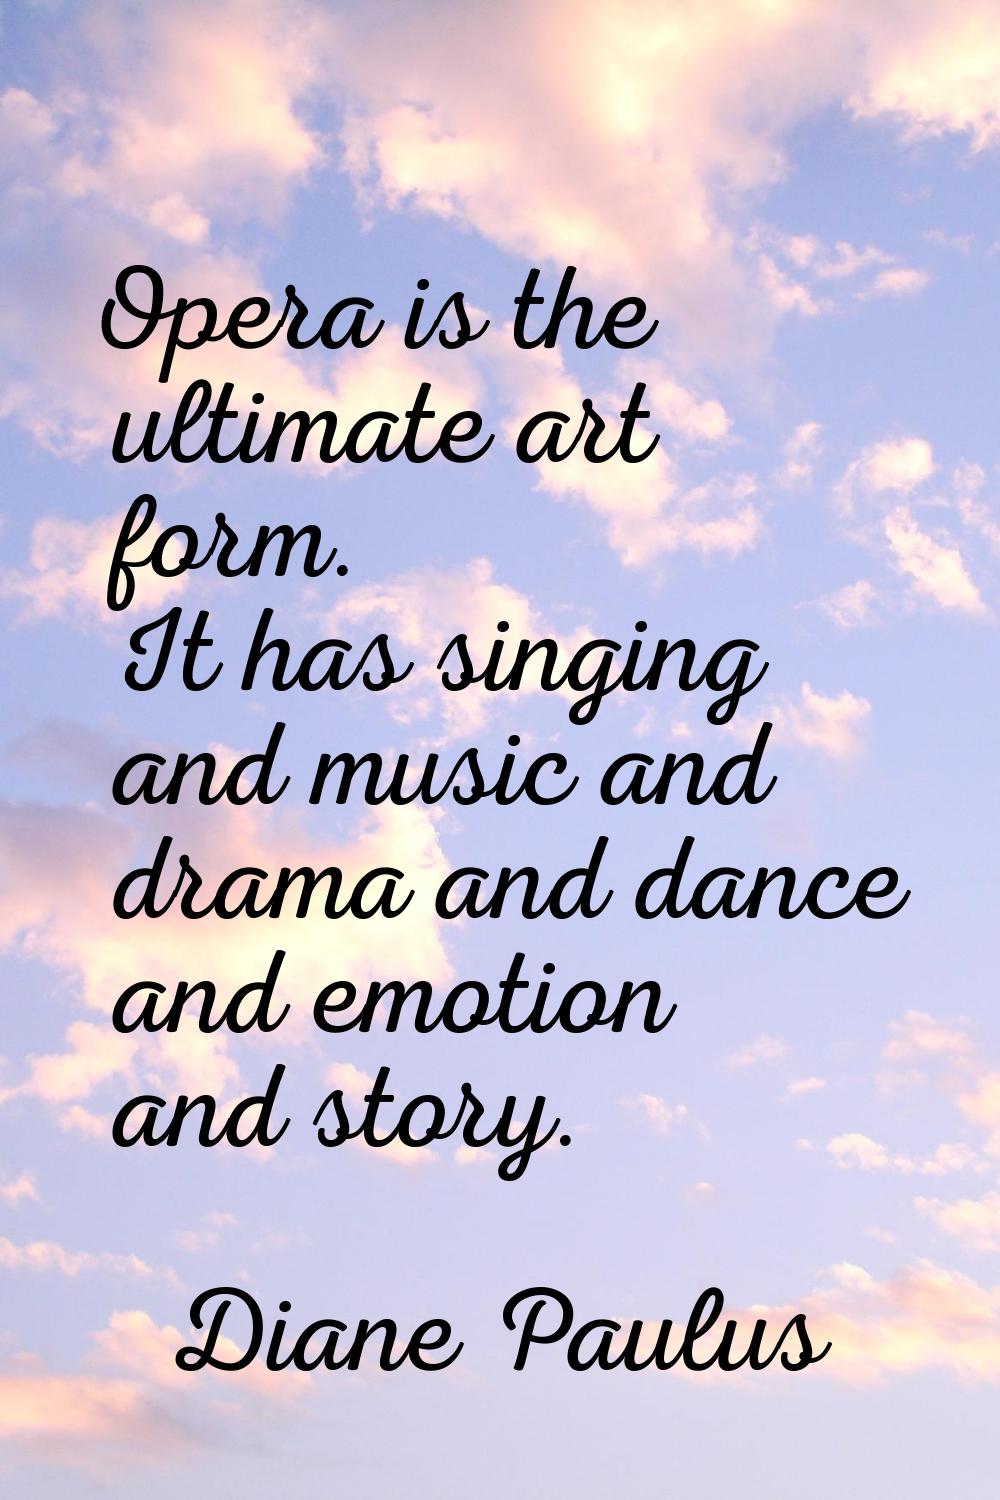 Opera is the ultimate art form. It has singing and music and drama and dance and emotion and story.